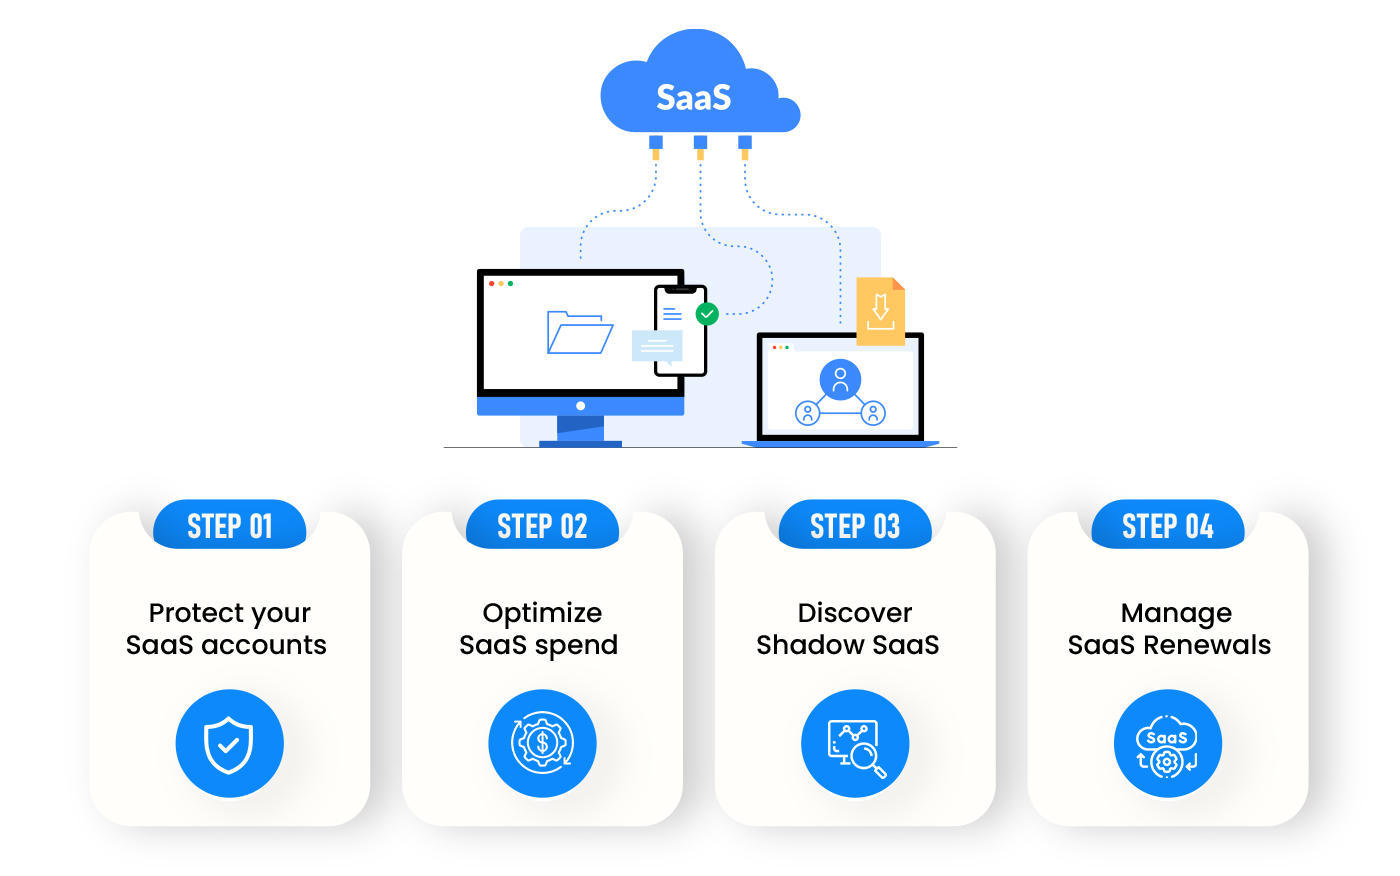 Significant Steps in Managing SaaS Applications